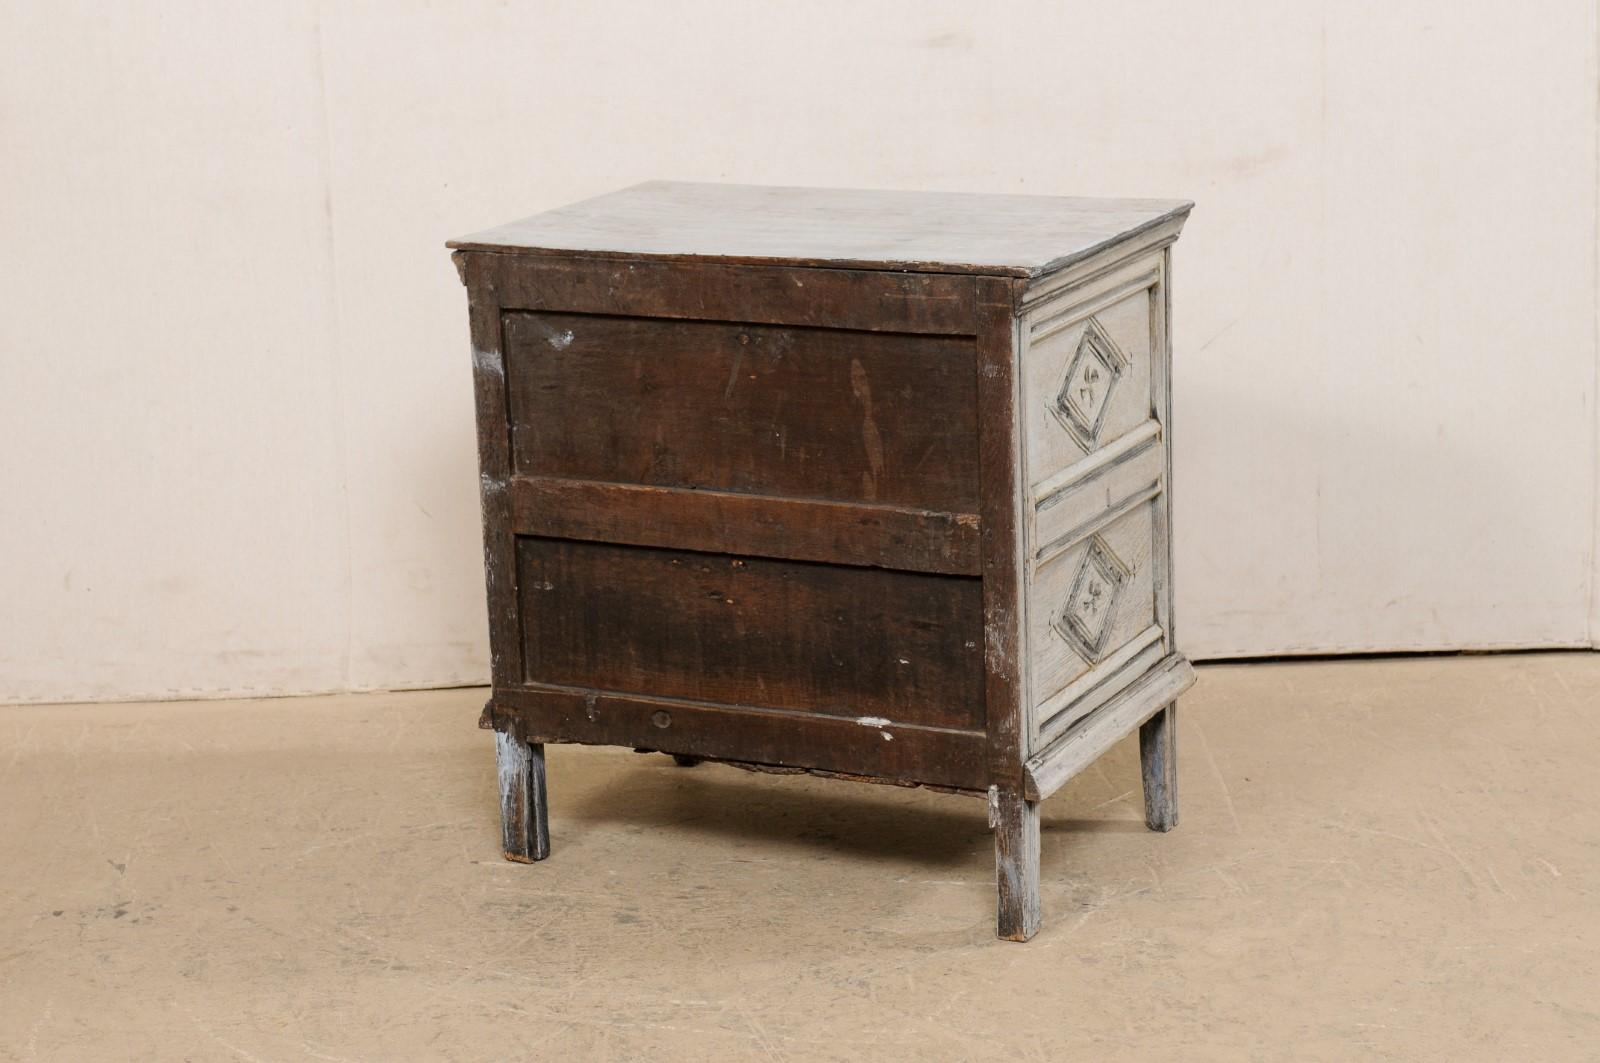 19th C. English Smaller-Sized Chest Adorn in Geometrically Carved Panels  5